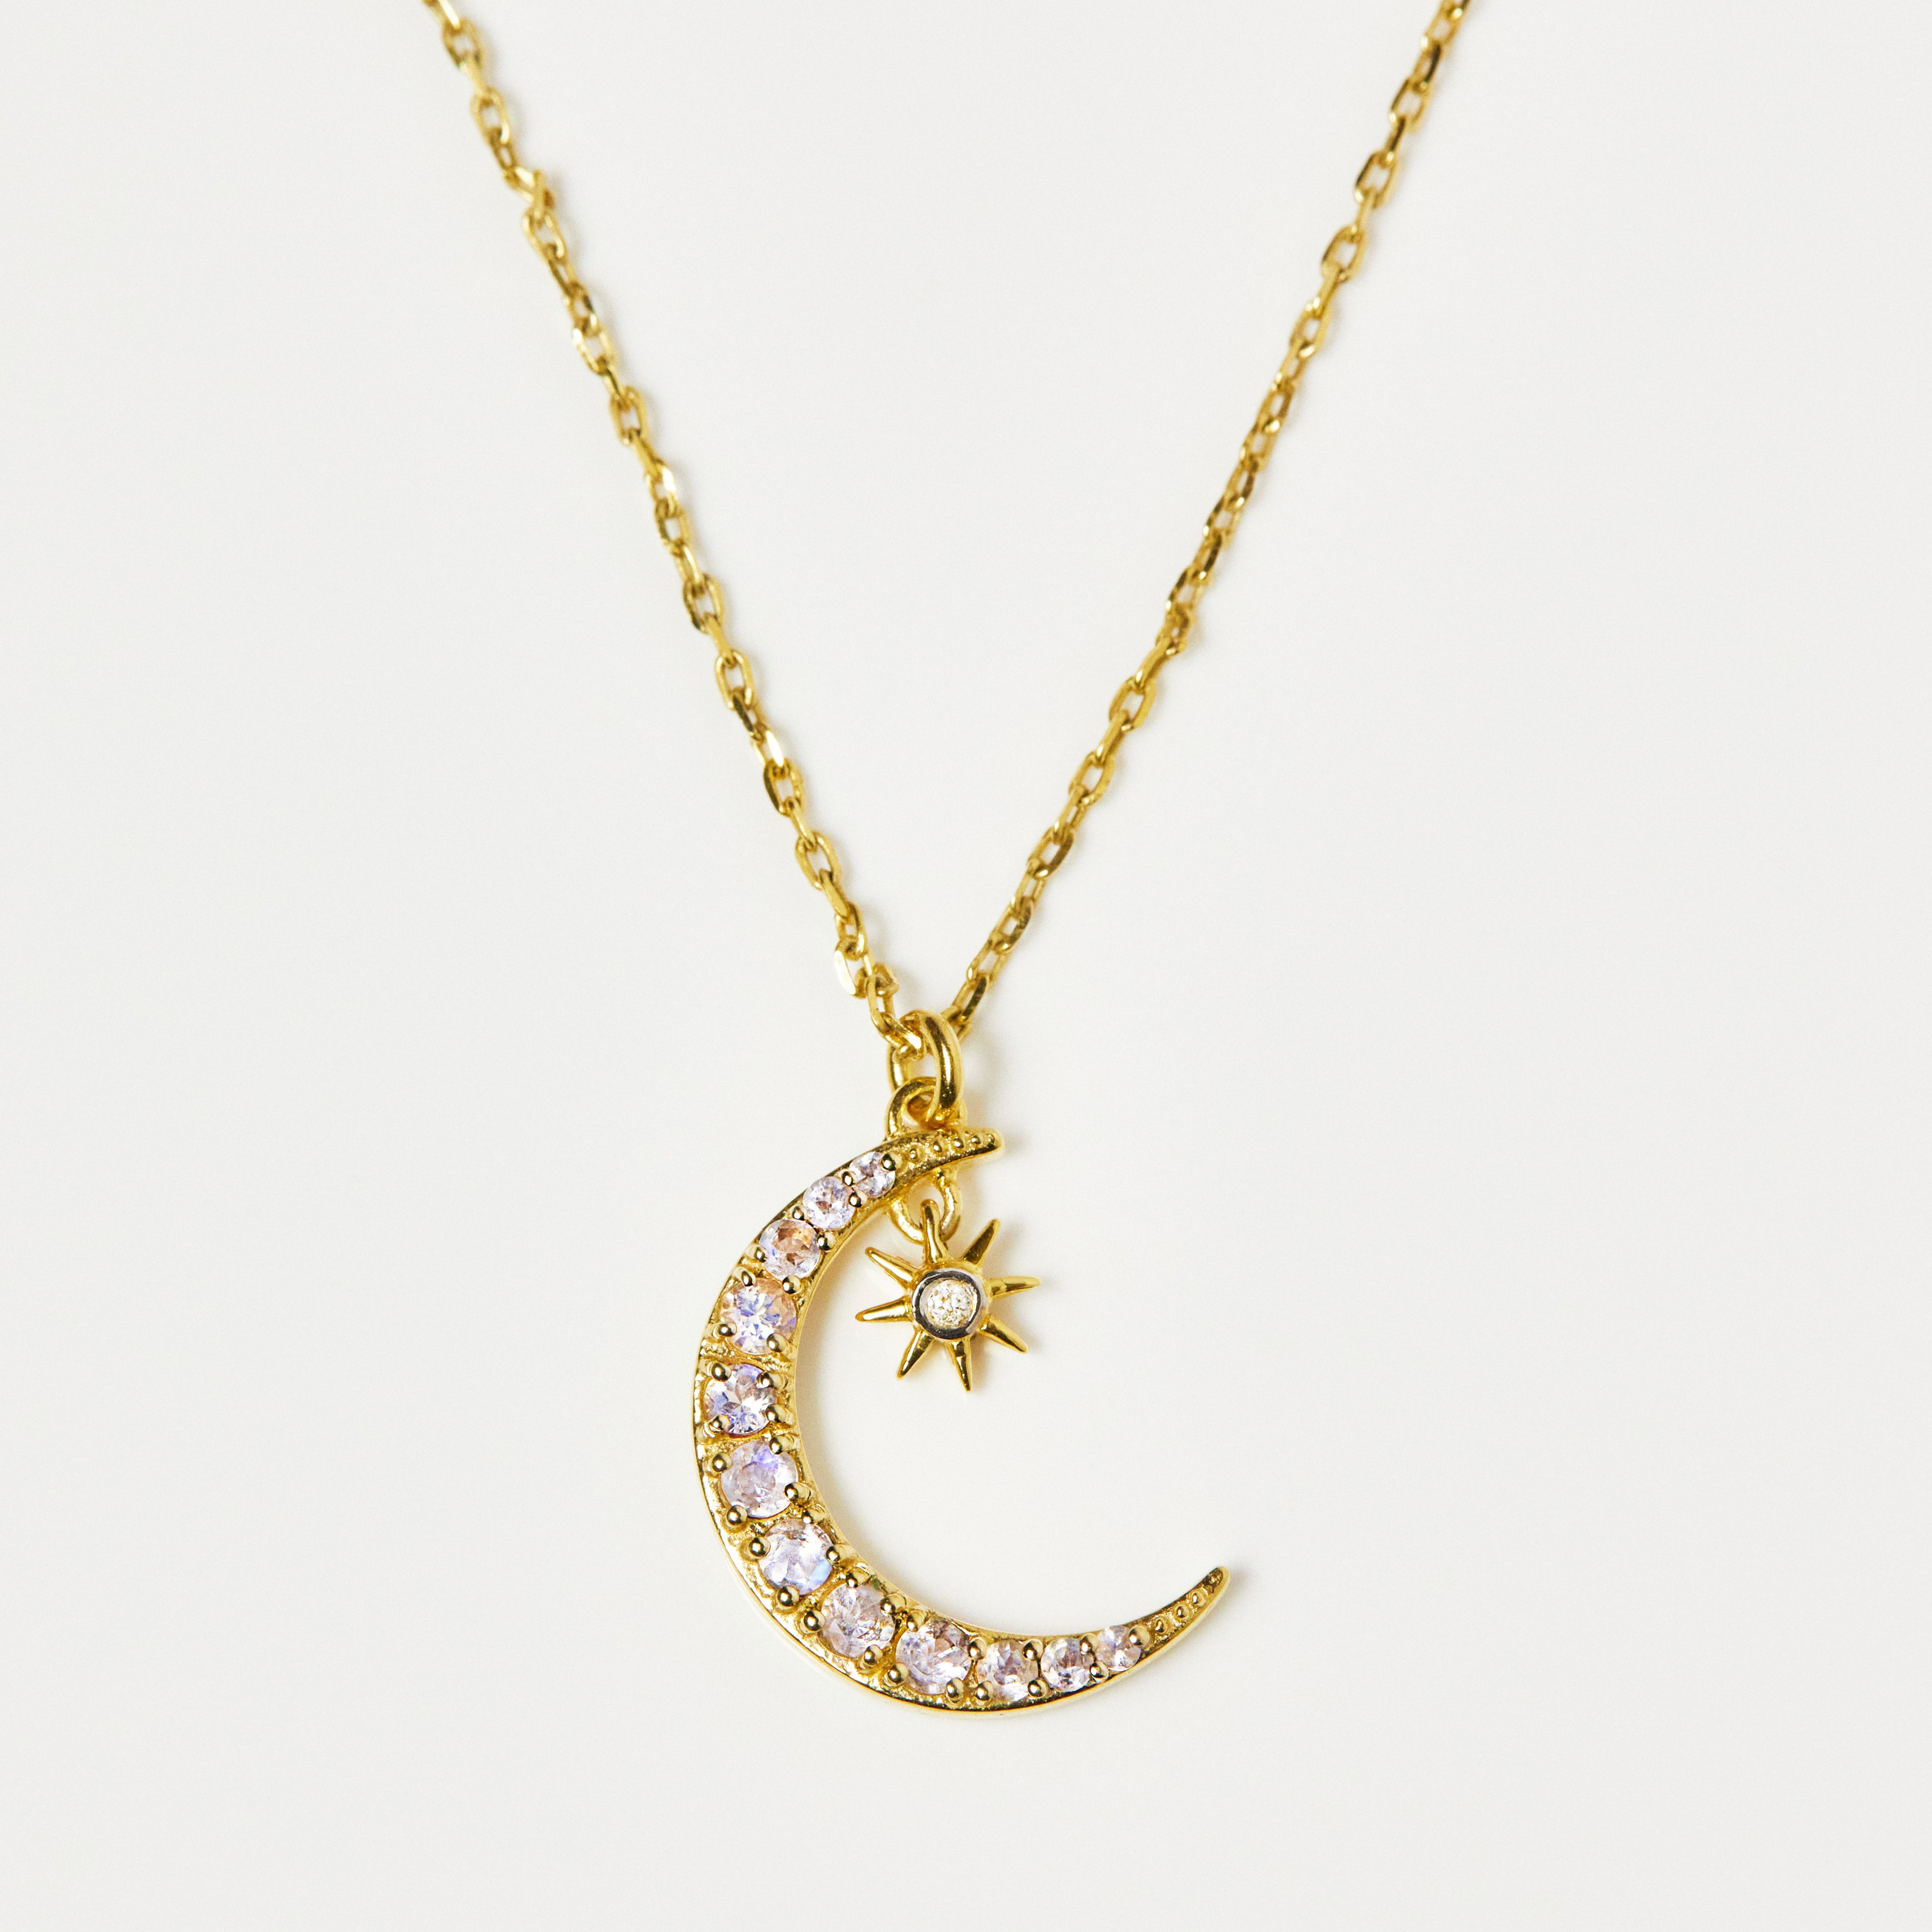 Sun and Crescent Moon 22k Gold-Plated Pendant Necklace - Sacred Duo | NOVICA